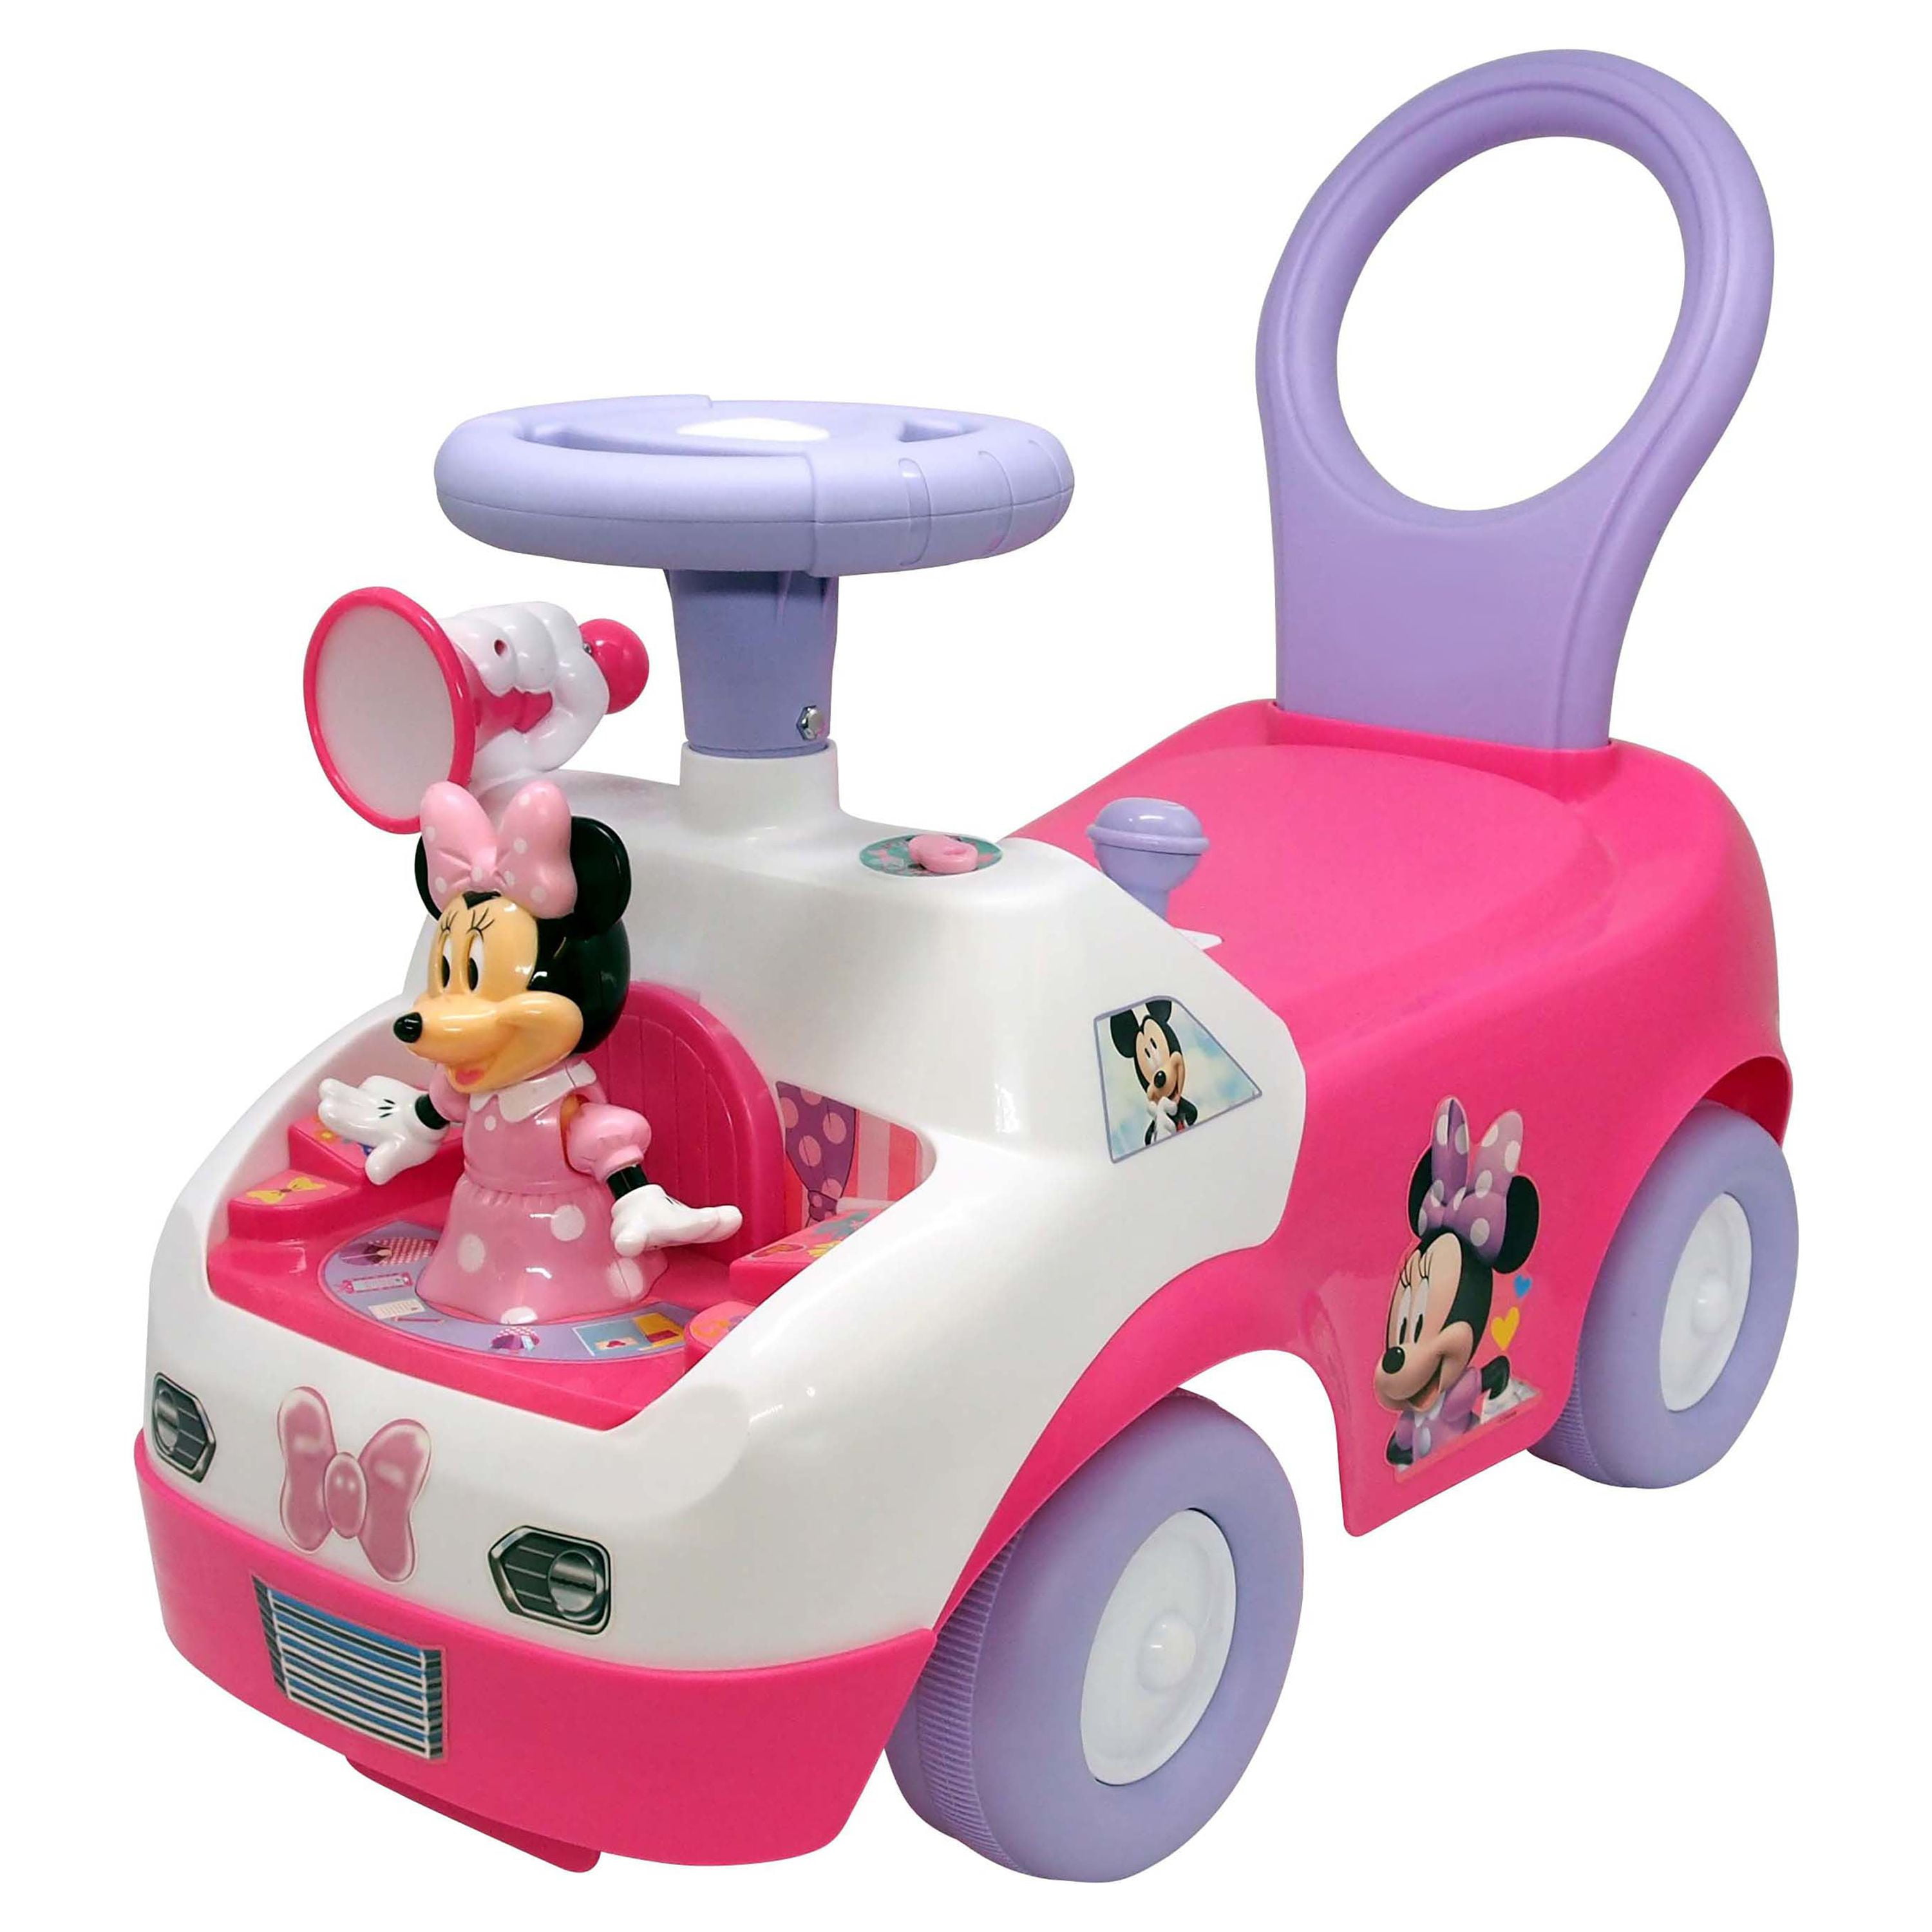 Kiddieland Minnie Mouse Dancing Car Activity Ride-On Interactive Sounds with